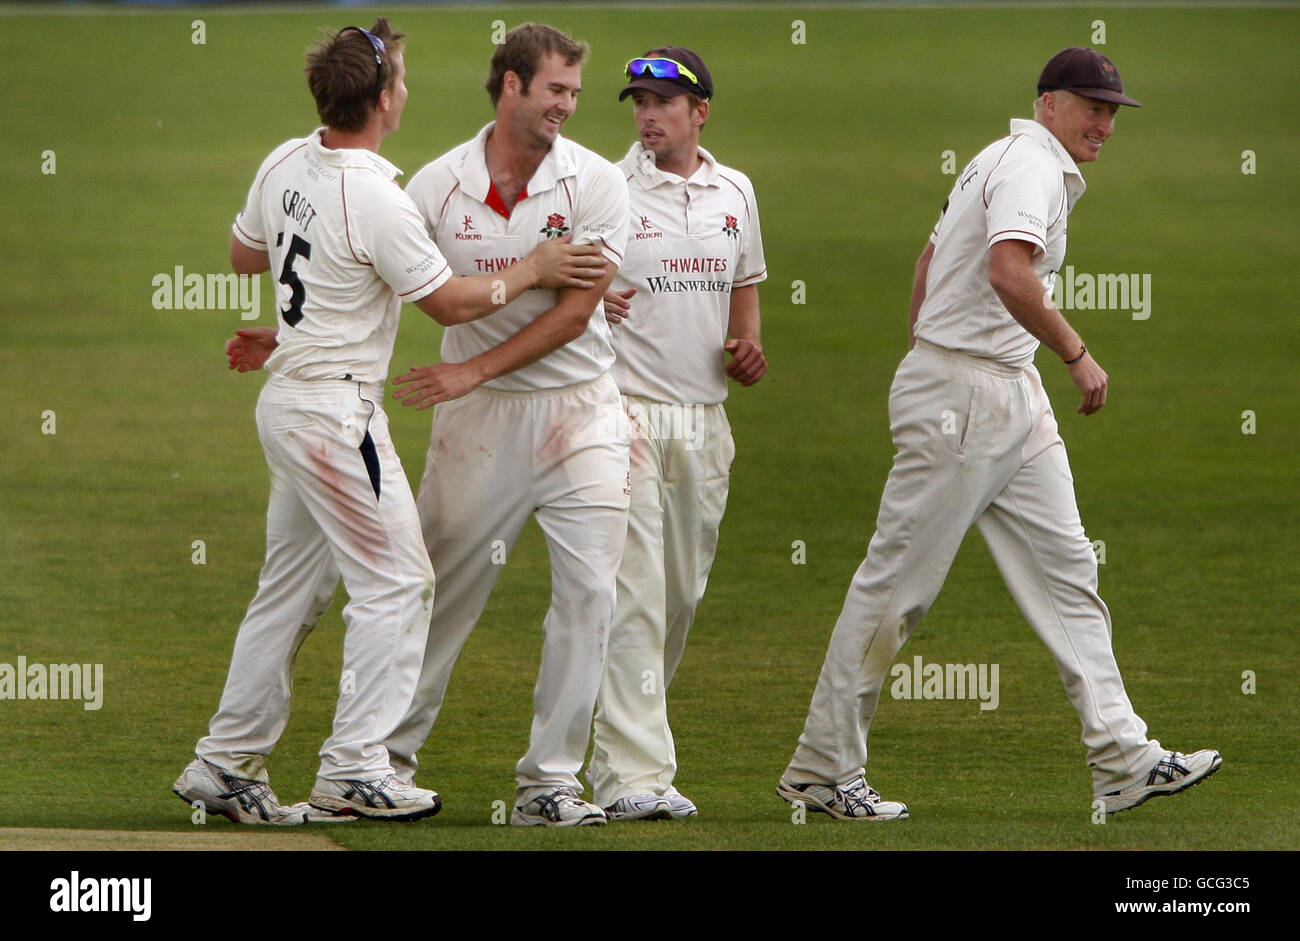 Lancashire fielder Steven Croft (left) celebrates with teammates and captain Glen Chapple (right) after catching the final Warwicksire batsman Jonathan Trott for 150 to claim victory, during the LV County Championship, Division One match at Edgbaston, Birmingham. Stock Photo